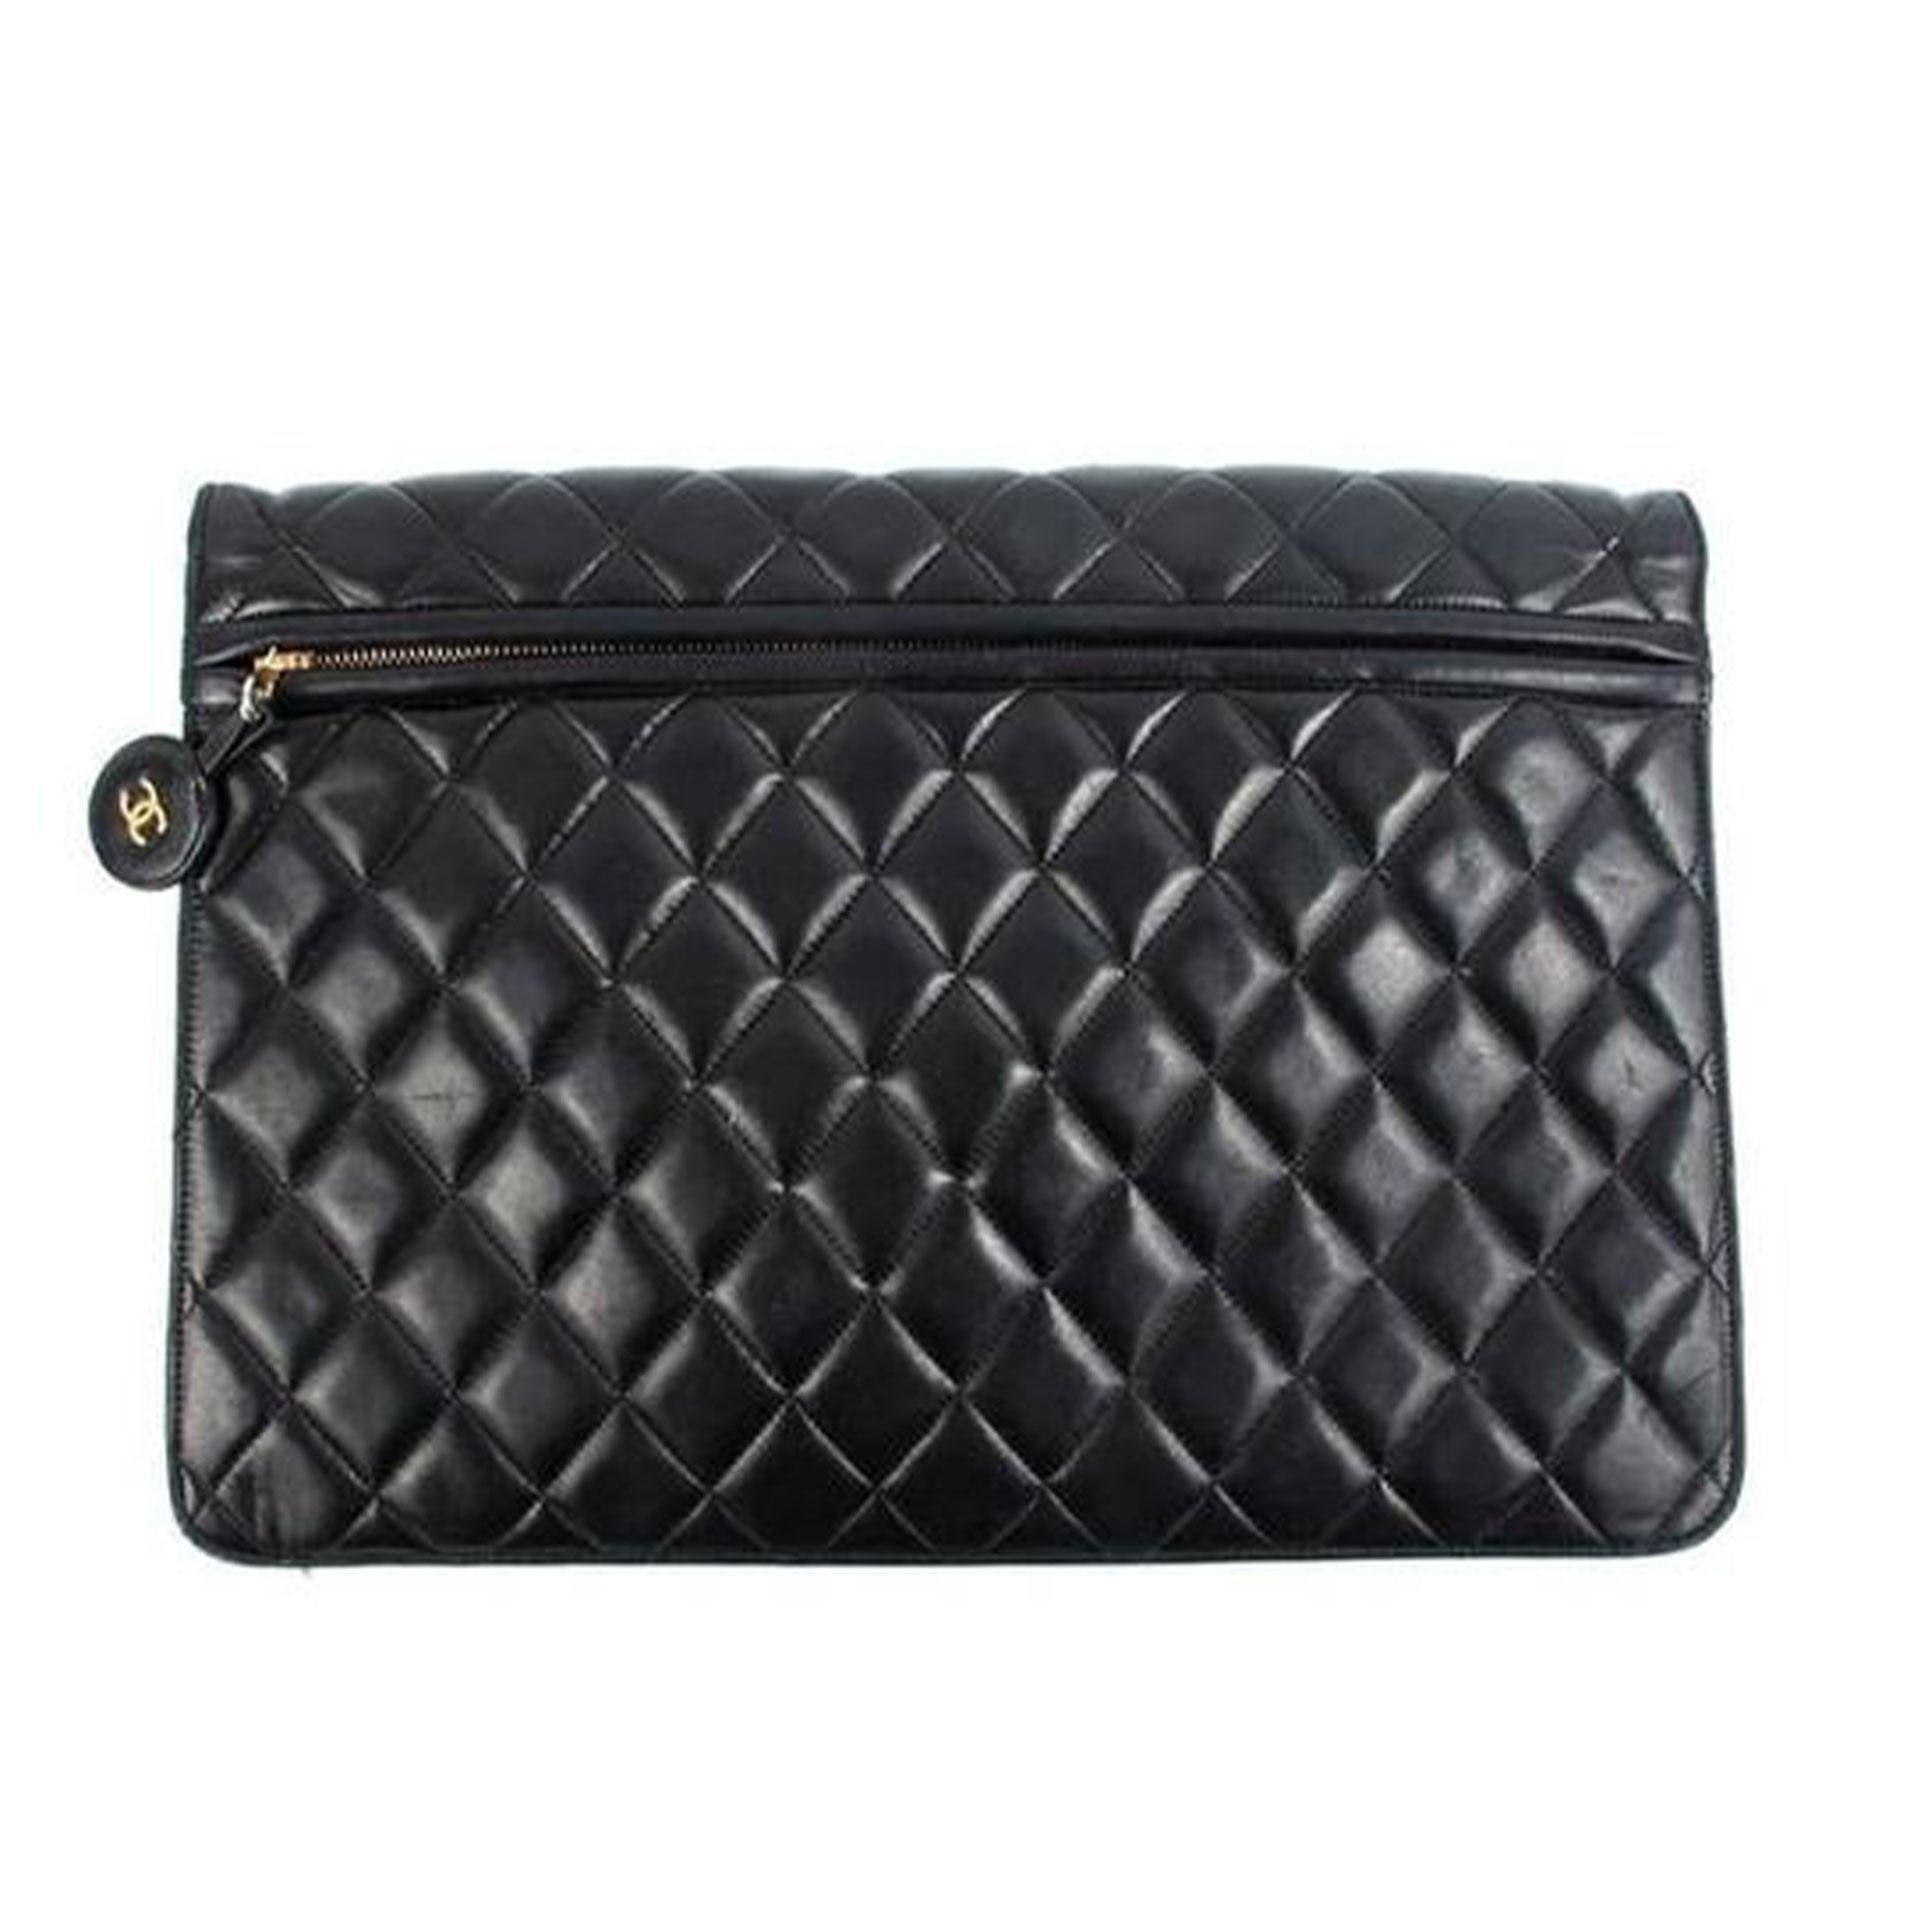 Chanel 1990 Rare Jumbo Maxi XL Vintage Classic Flap Giant Clutch Briefcase For Sale 5